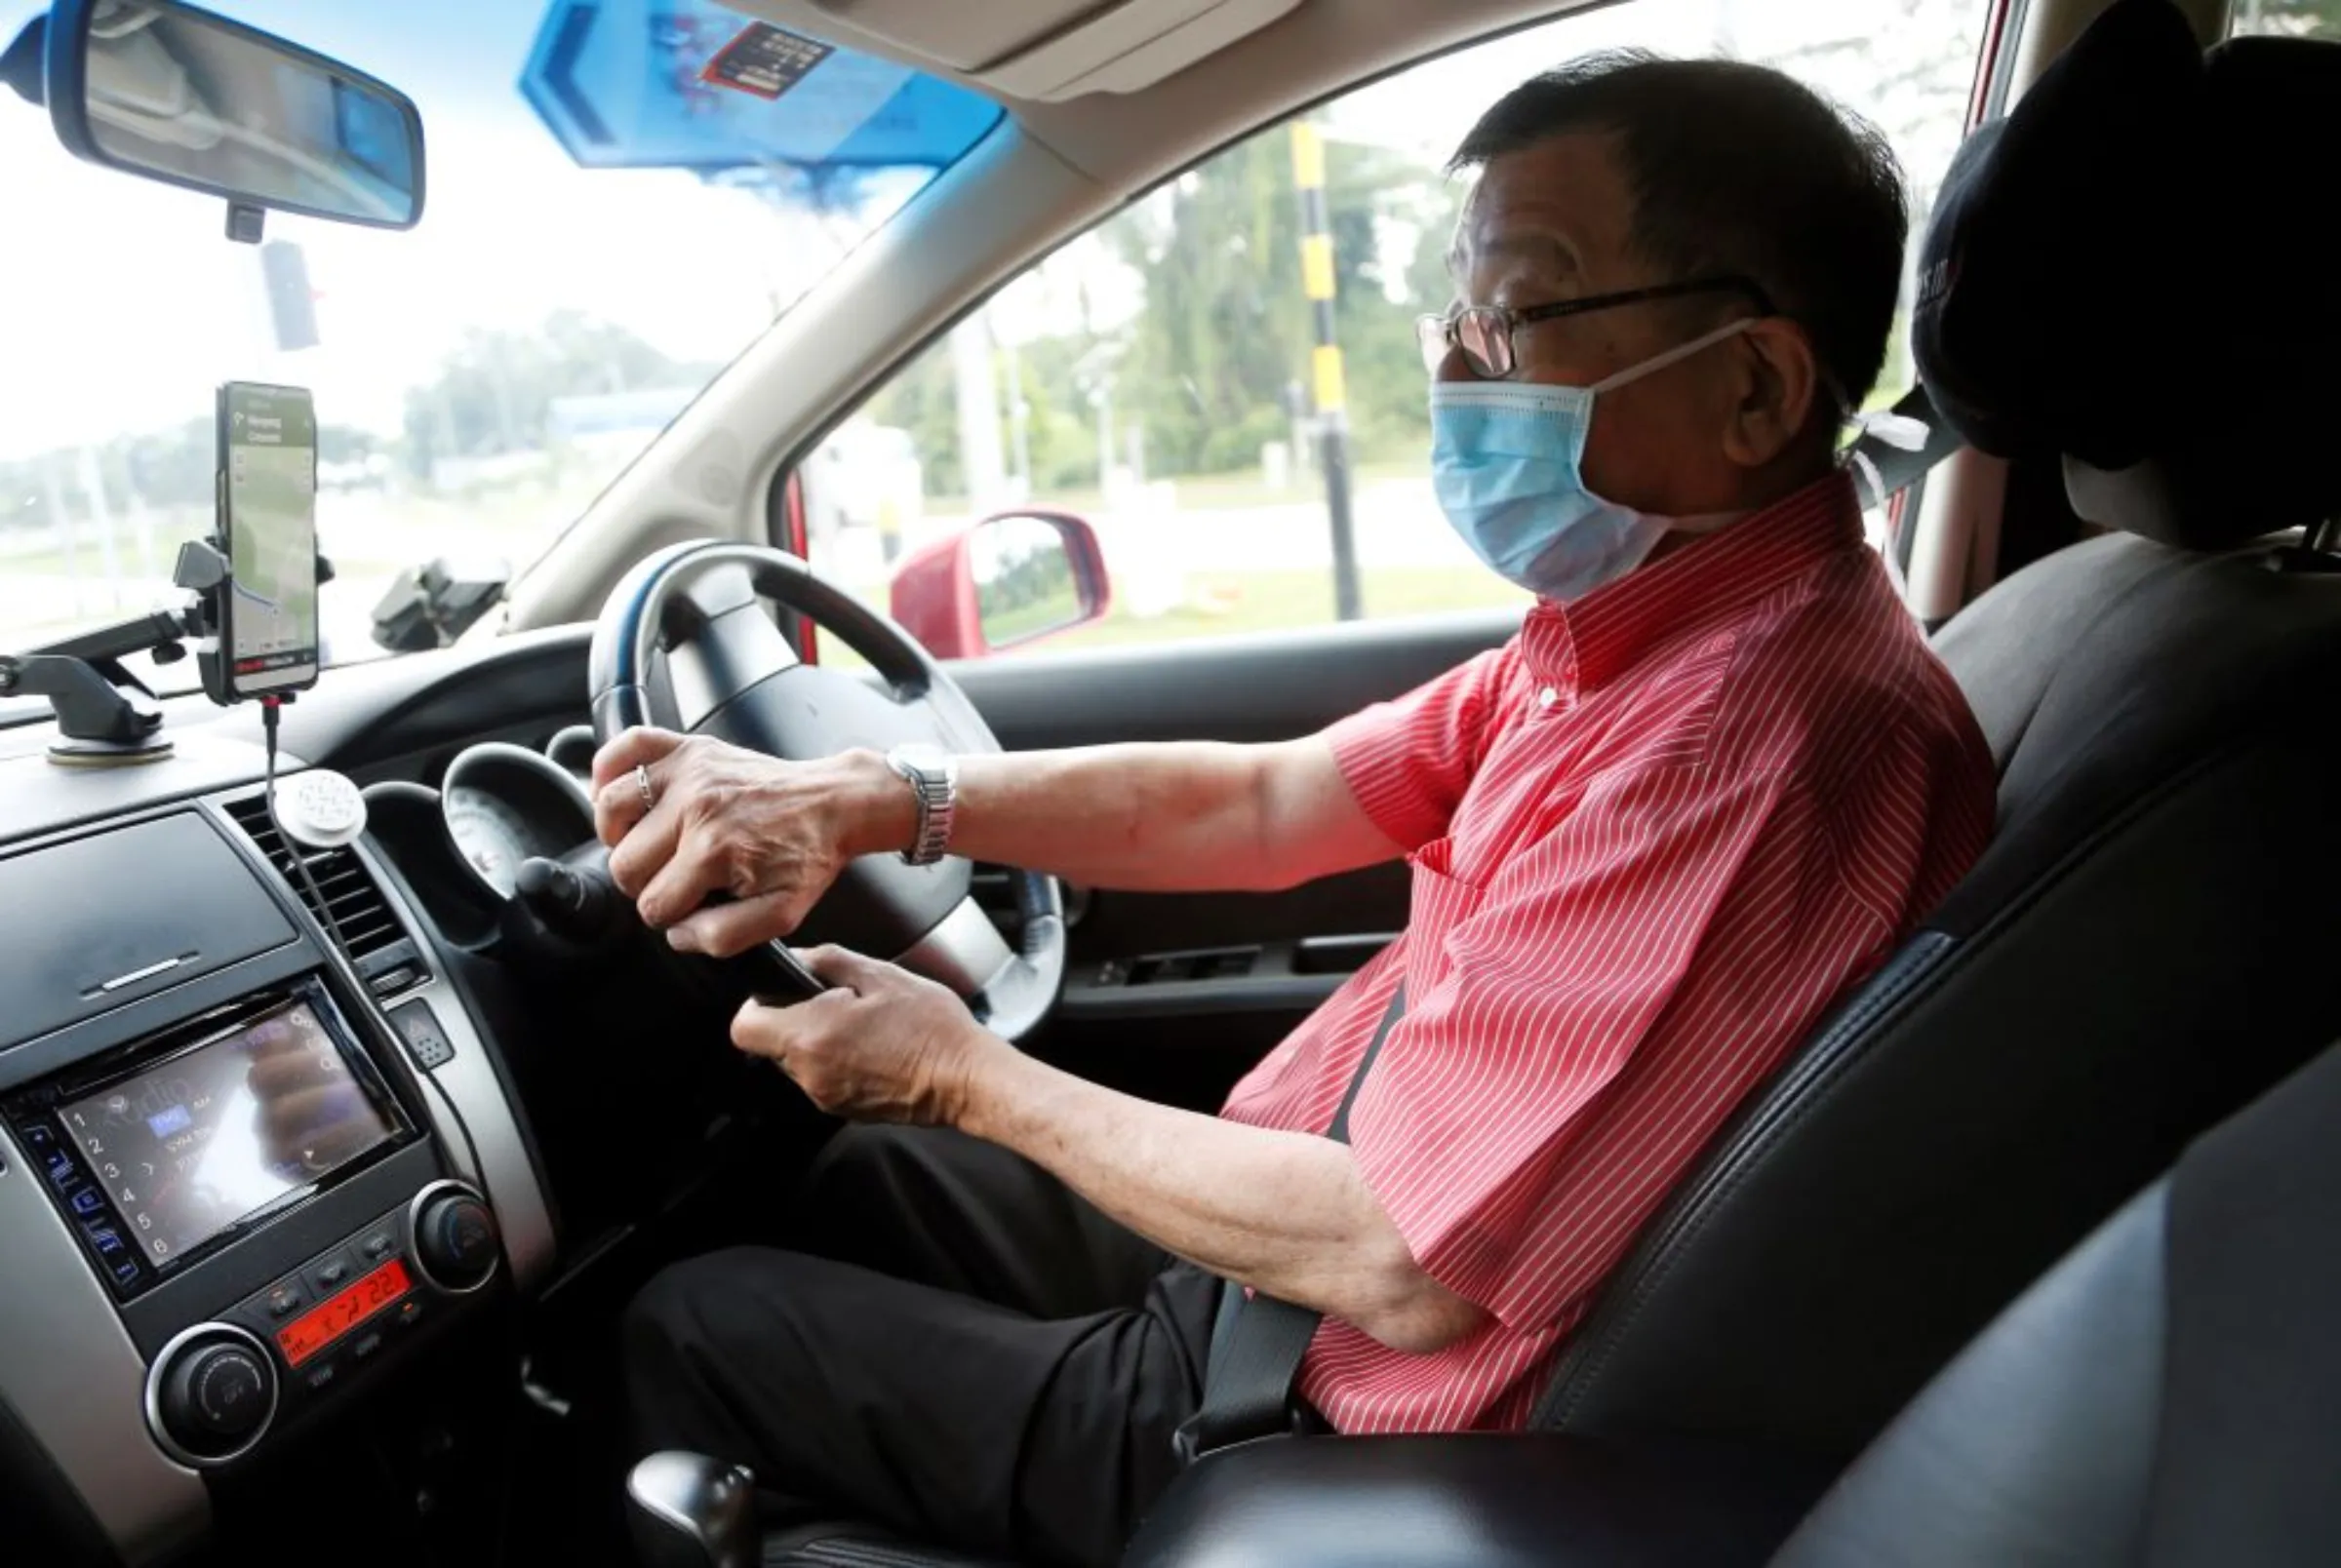 A private hire car driver wears a mask in Singapore, January 28, 2020. REUTERS/Feline Lim